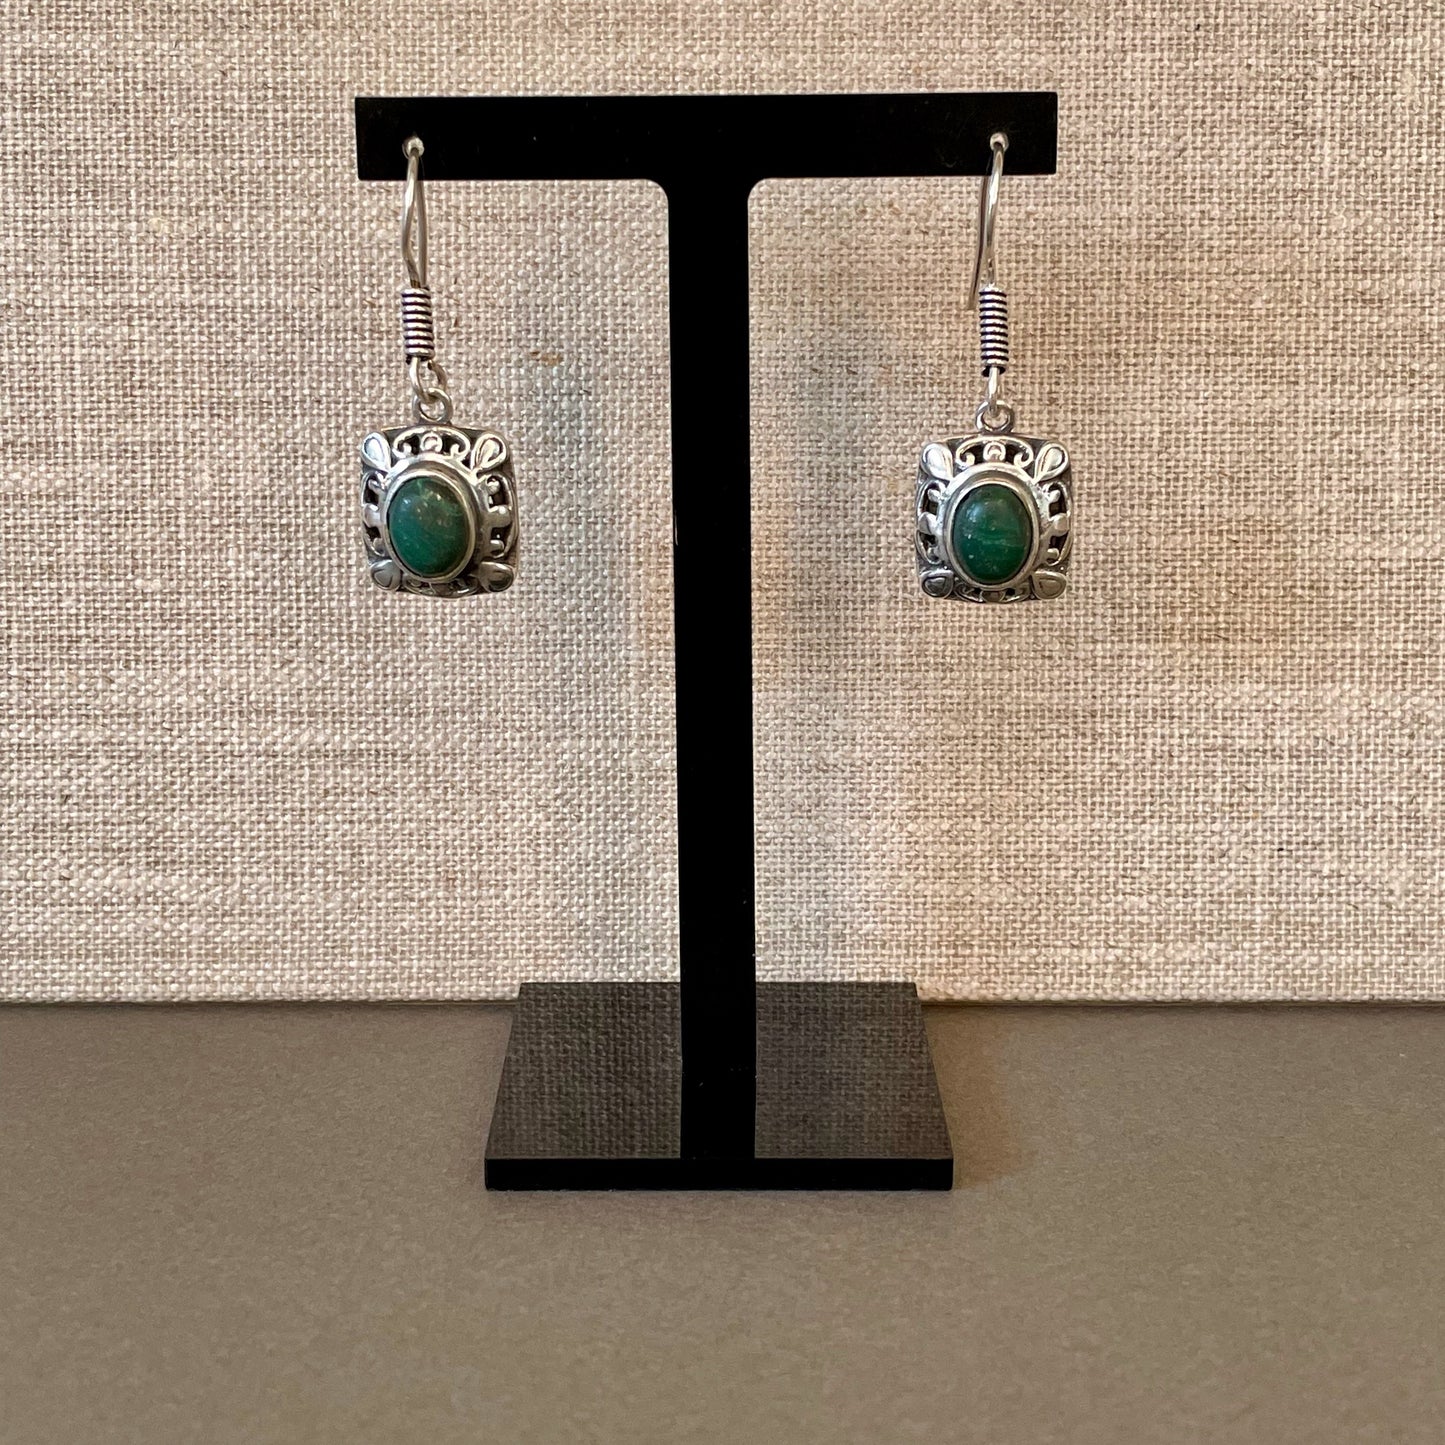 Fretwork Berber Silver Earrings with Oval green Stones on stand